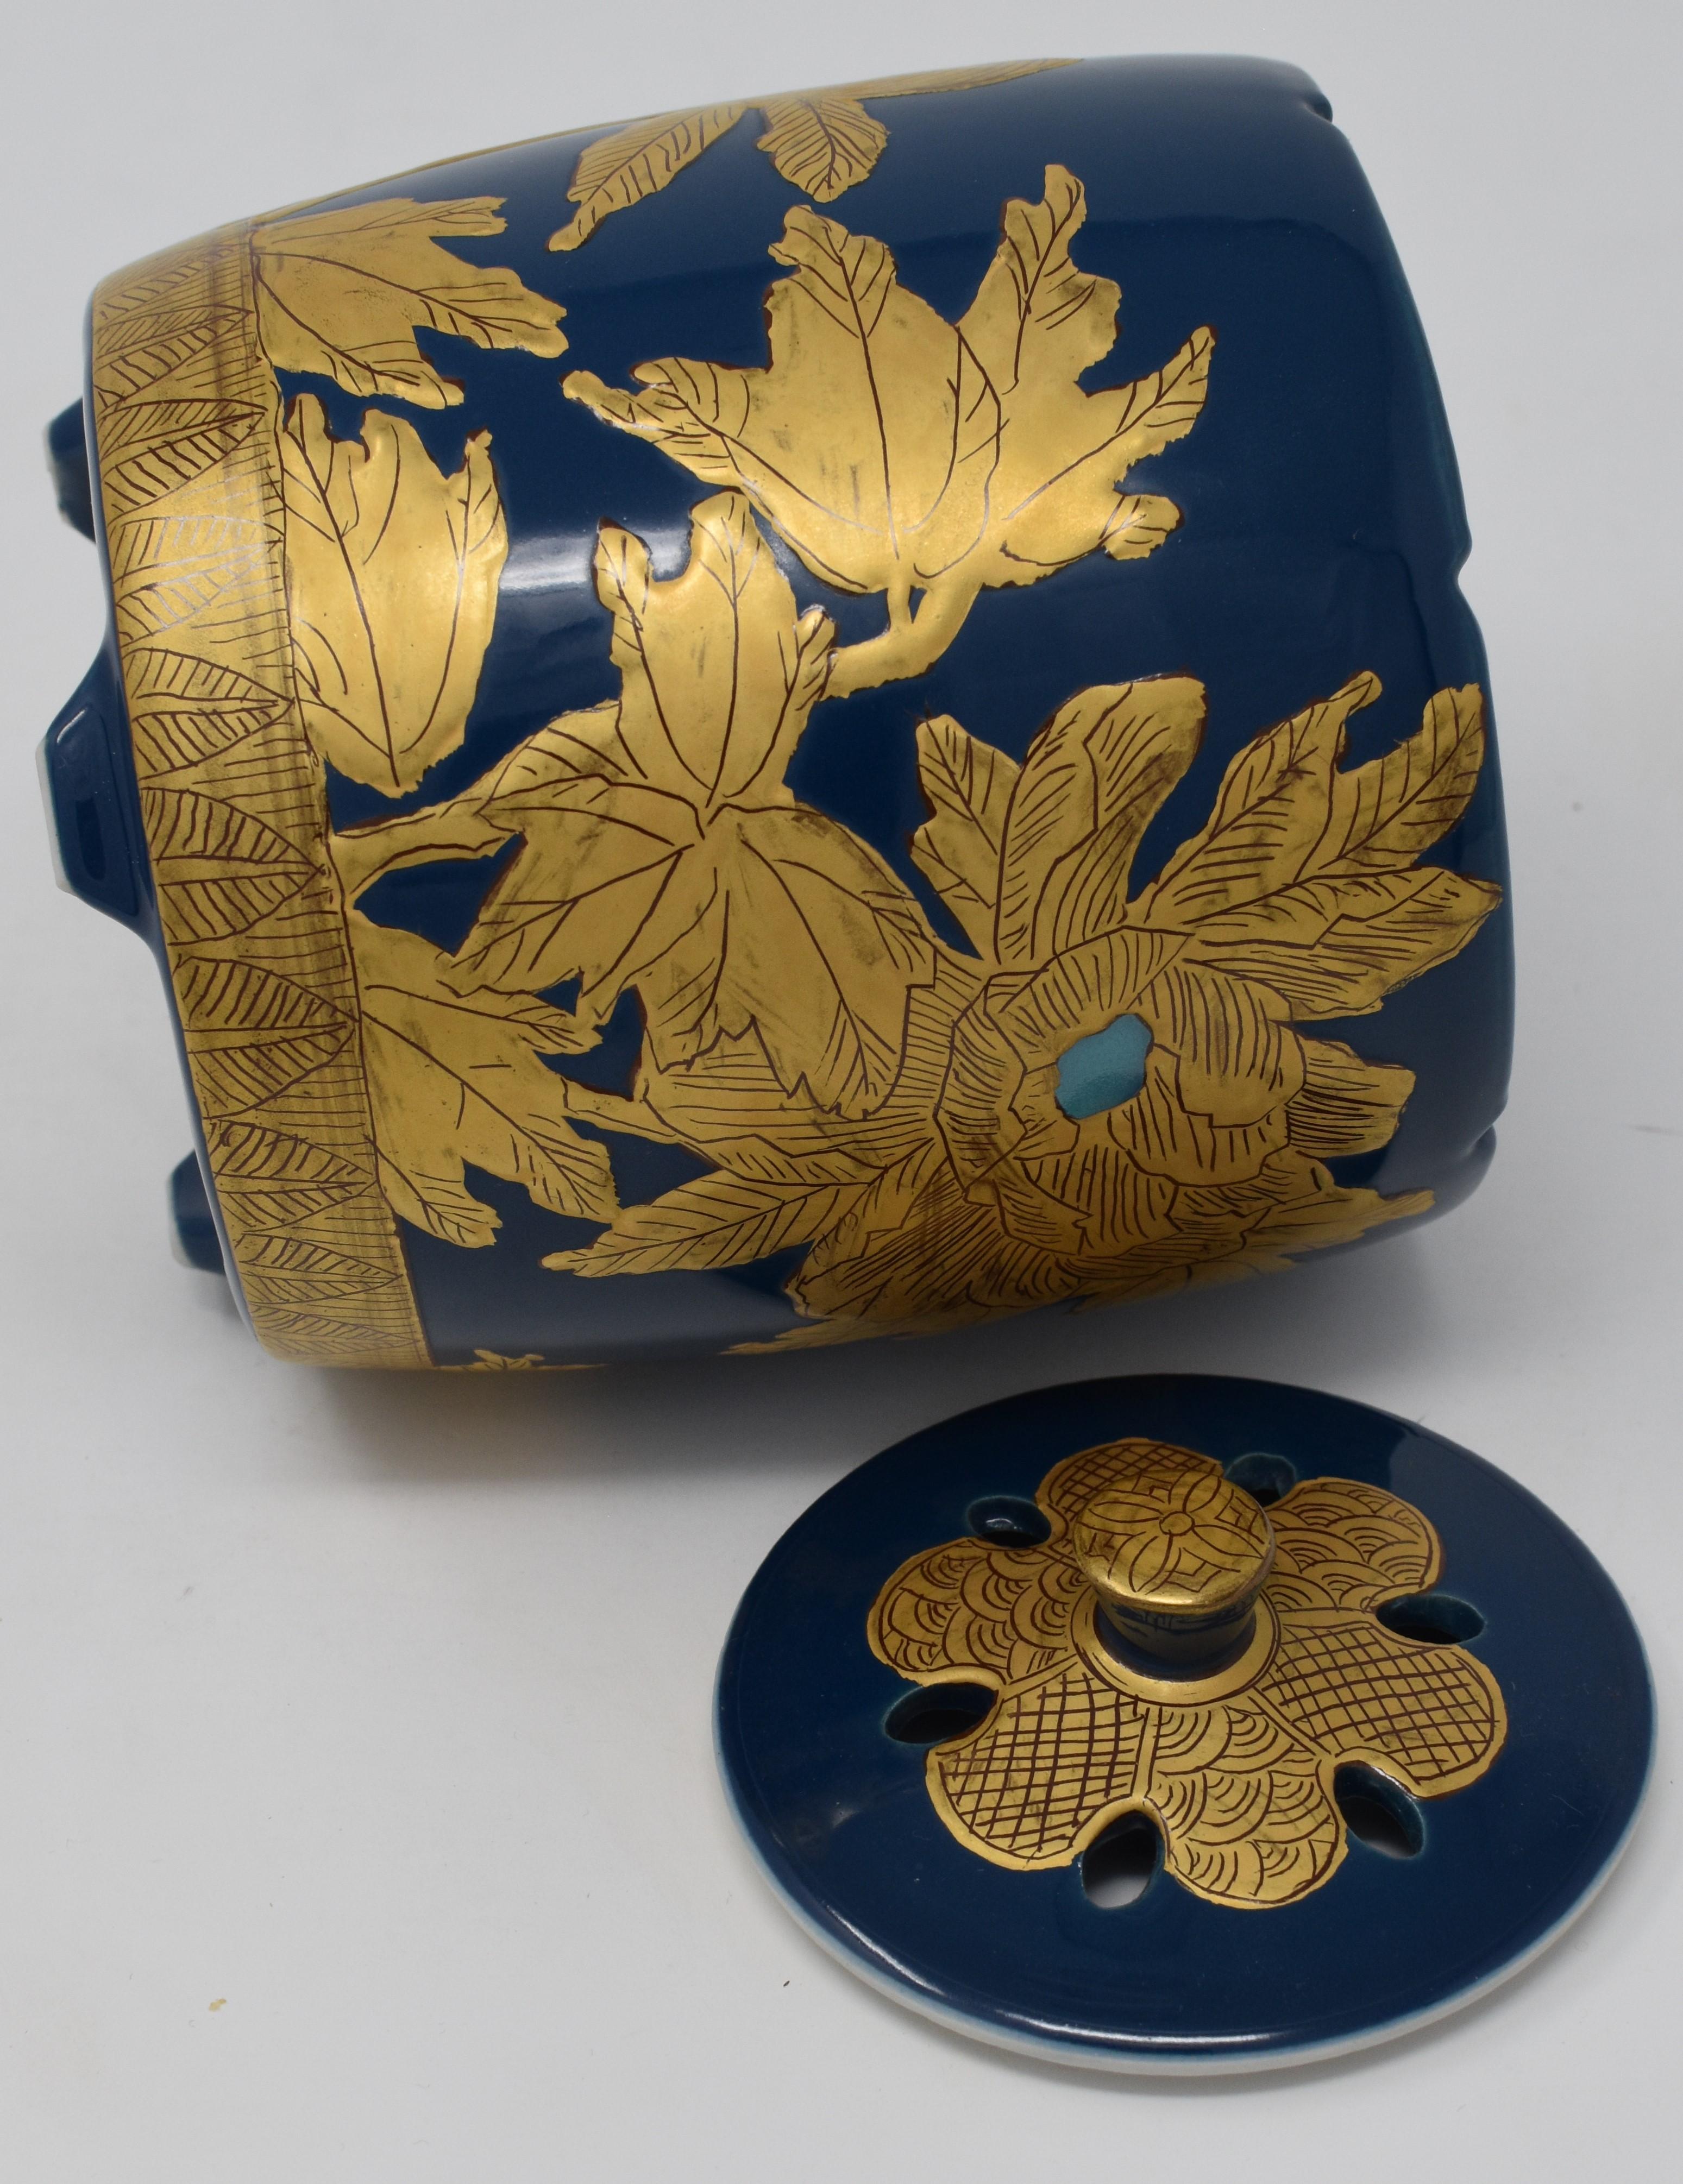 Extraordinnary contemporary Japanese collectible Kutani porcelain incense burner, vessel, intricately hand painted with pure gold on an elegantly shaped body in a stunning deep blue, a signed masterpiece by widely acclaimed award-winning master